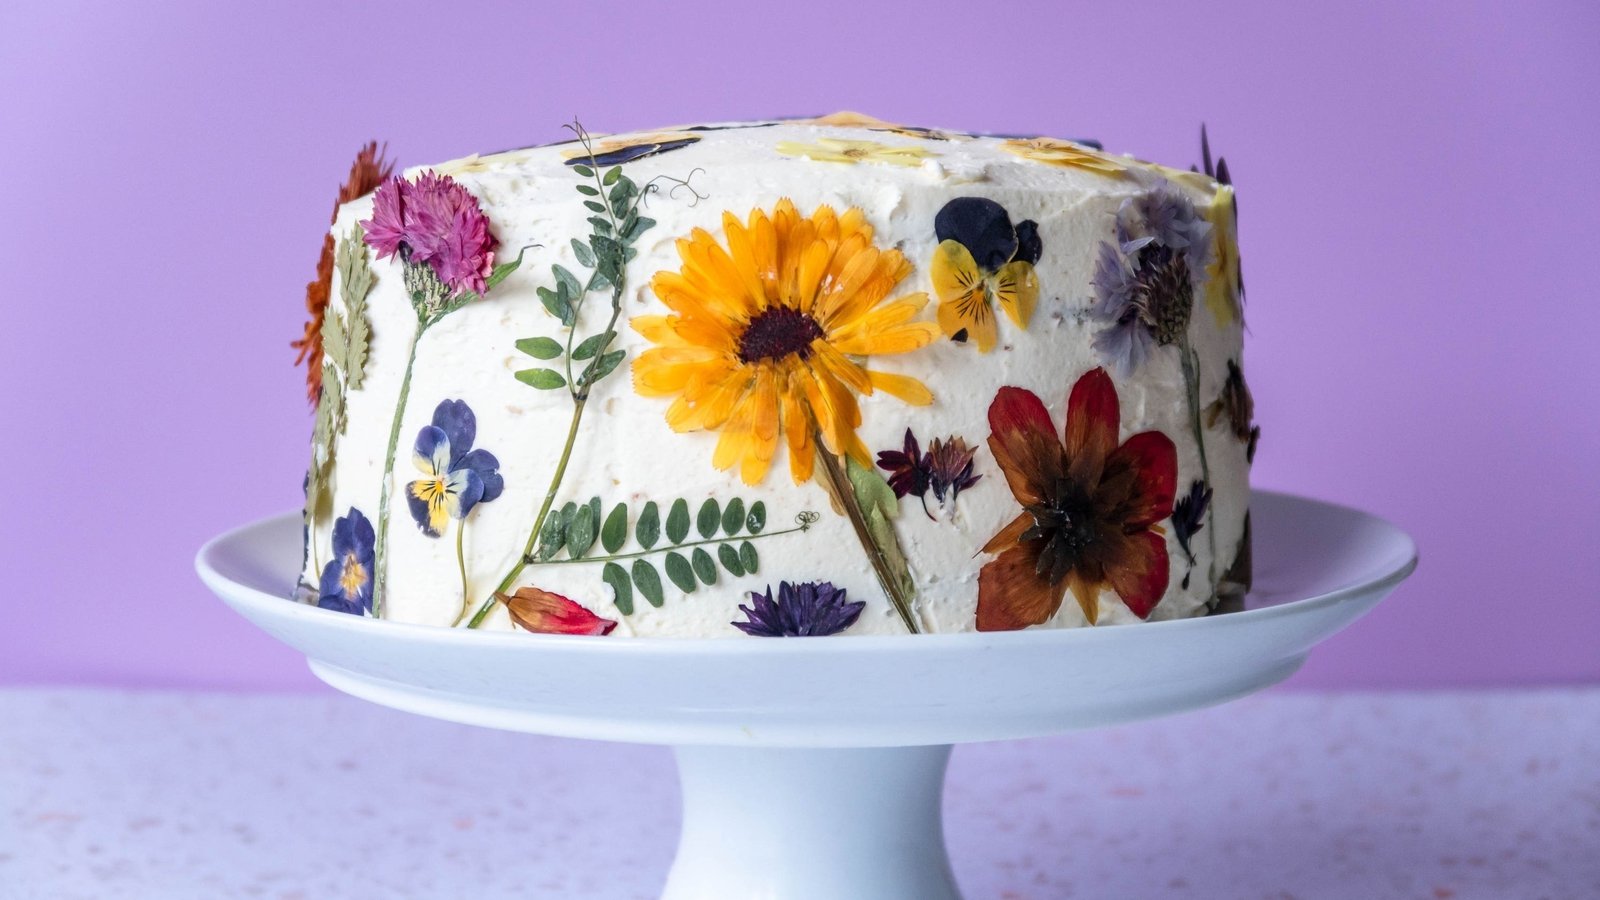 How to grow your own edible flowers for cakes, bakes & cocktails